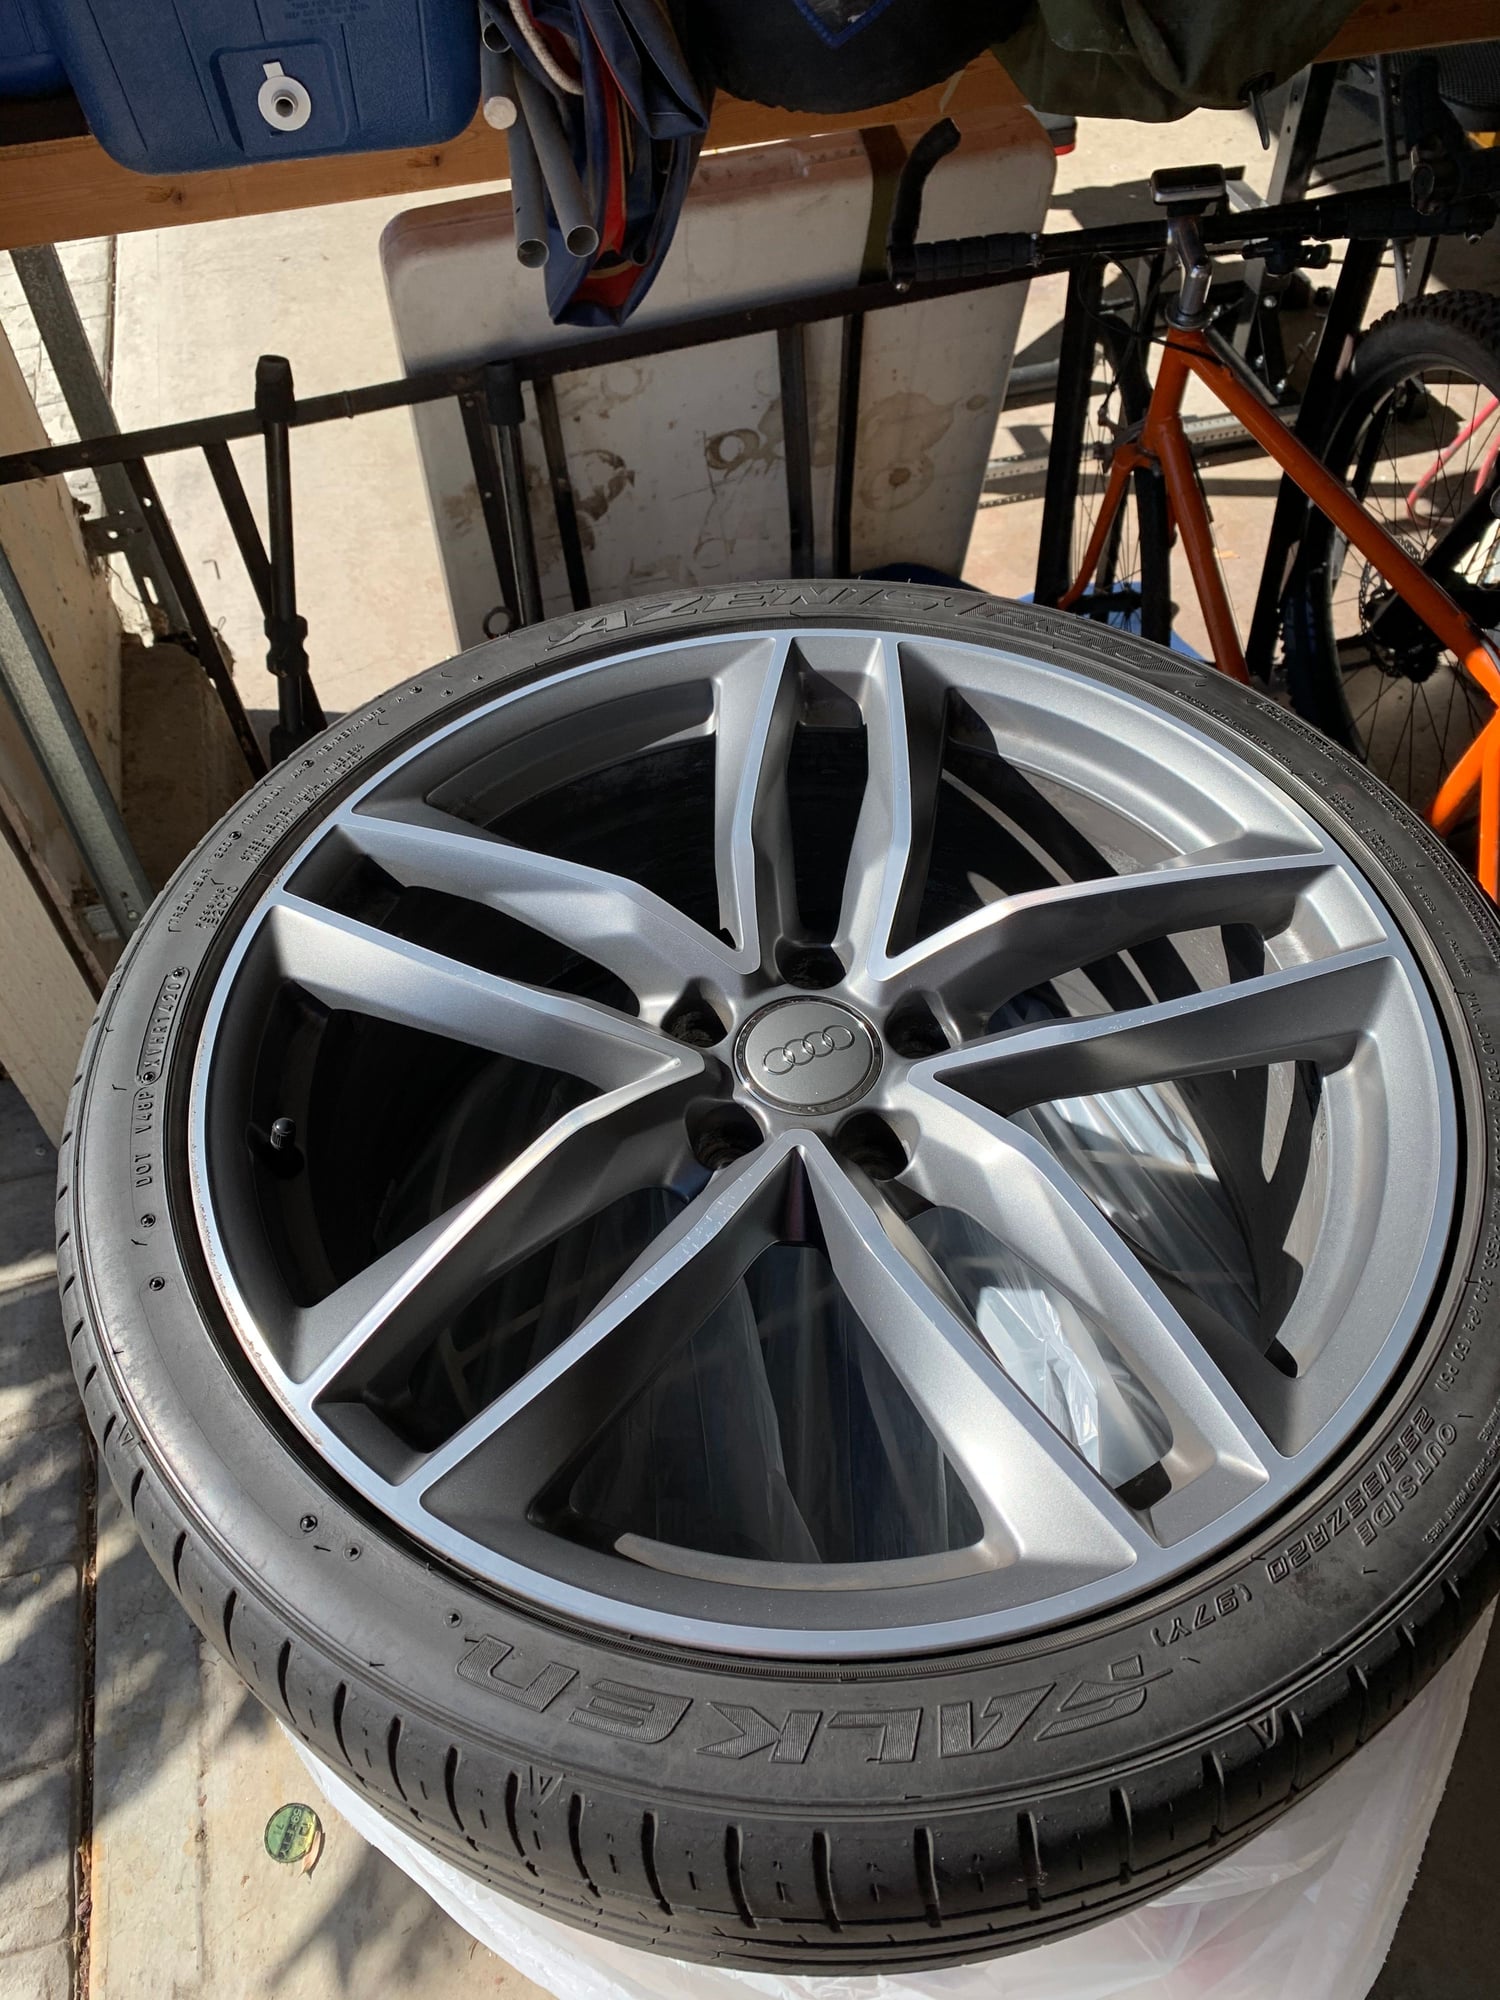 Wheels and Tires/Axles - Wheels with tires 20 x 8.5 S6 double 5 spoke - Used - 2007 to 2018 Audi S6 - 2007 to 2018 Audi A6 - Brentwood, CA 94513, United States